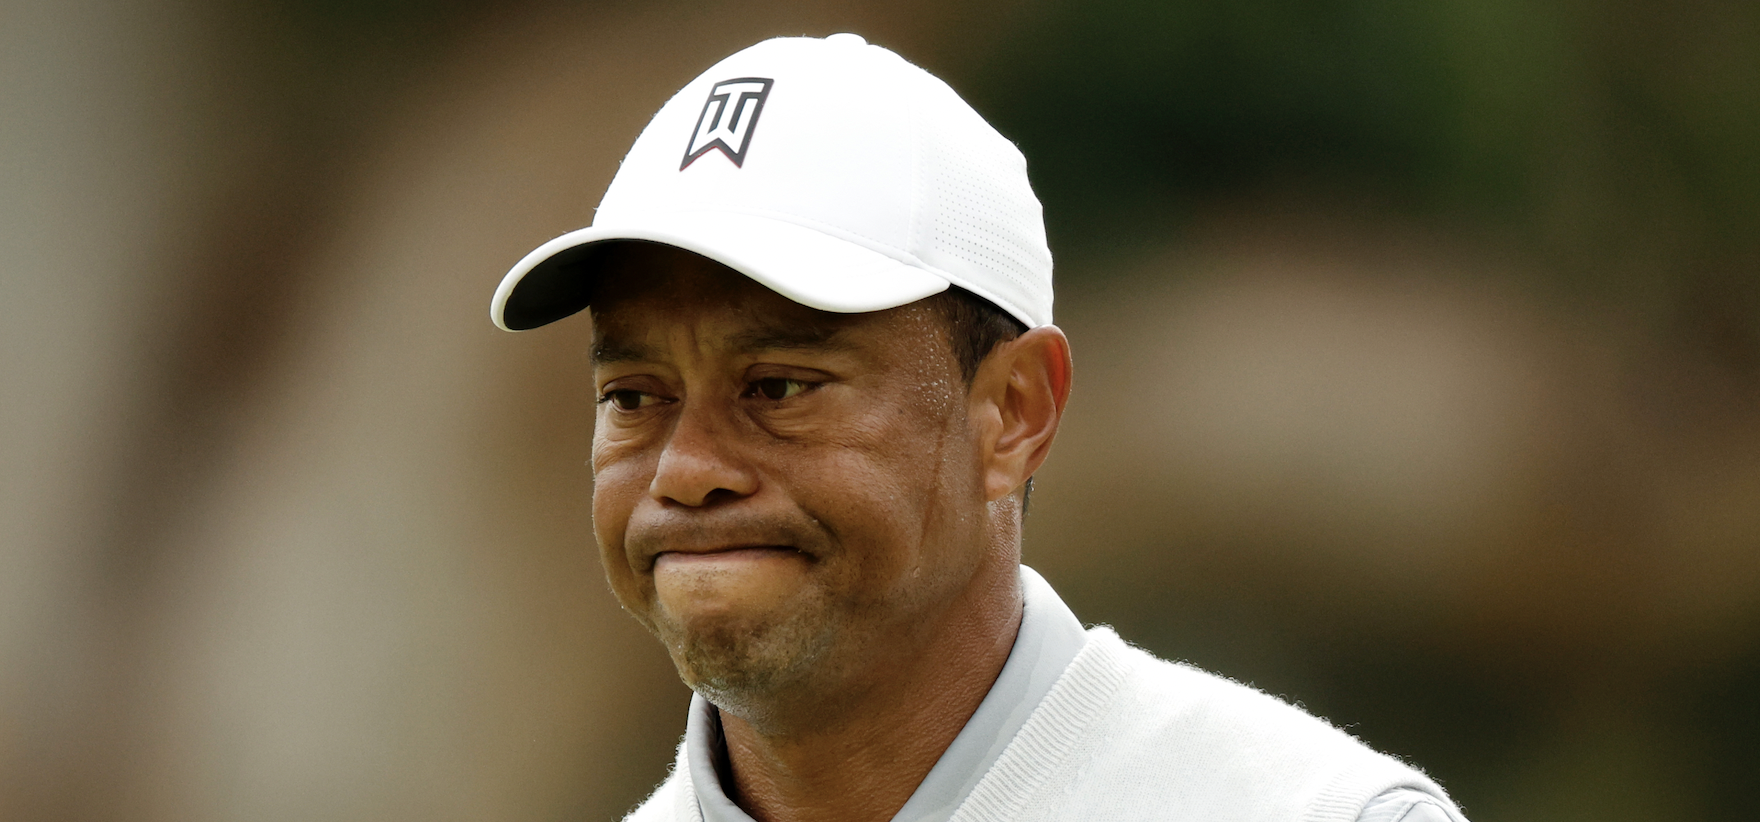 Tiger Woods Apologizes For Tampon Prank